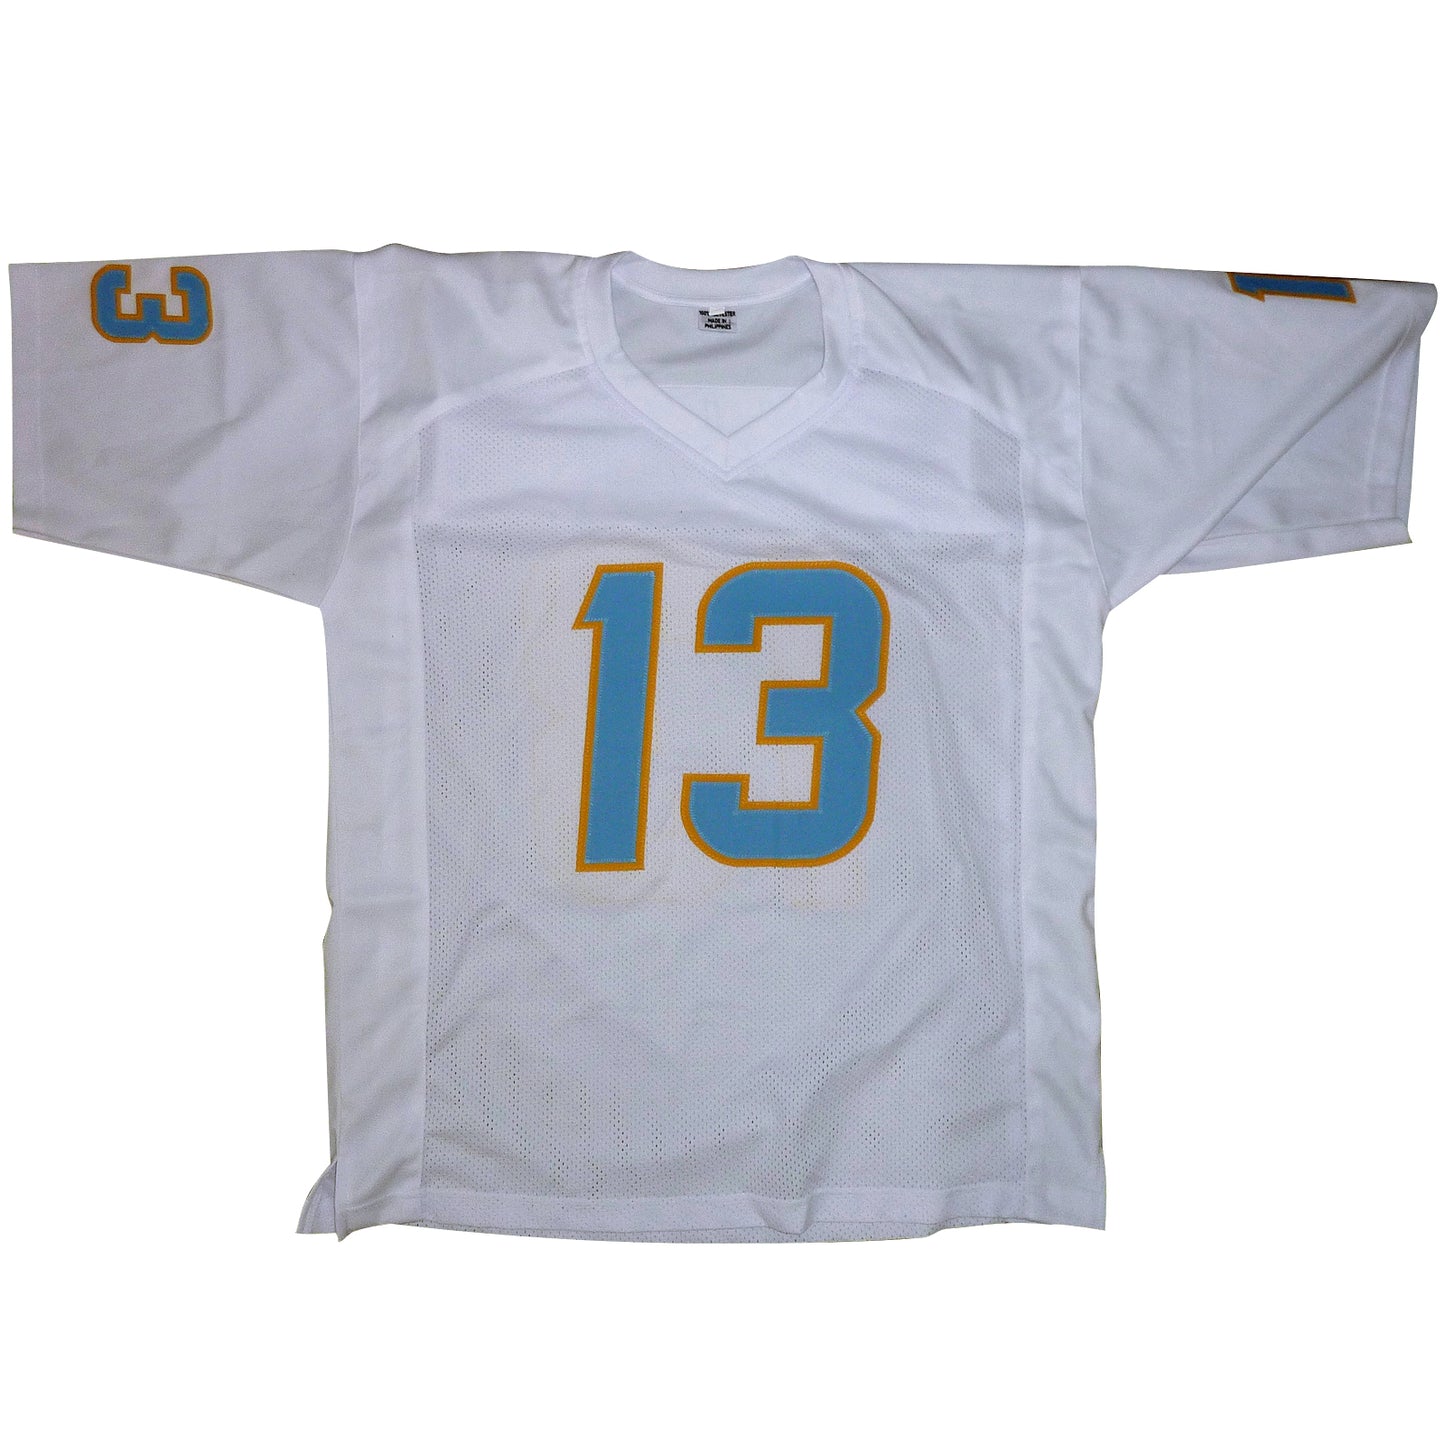 Keenan Allen Autographed Los Angeles Chargers (White #13) Custom Jersey Beckett